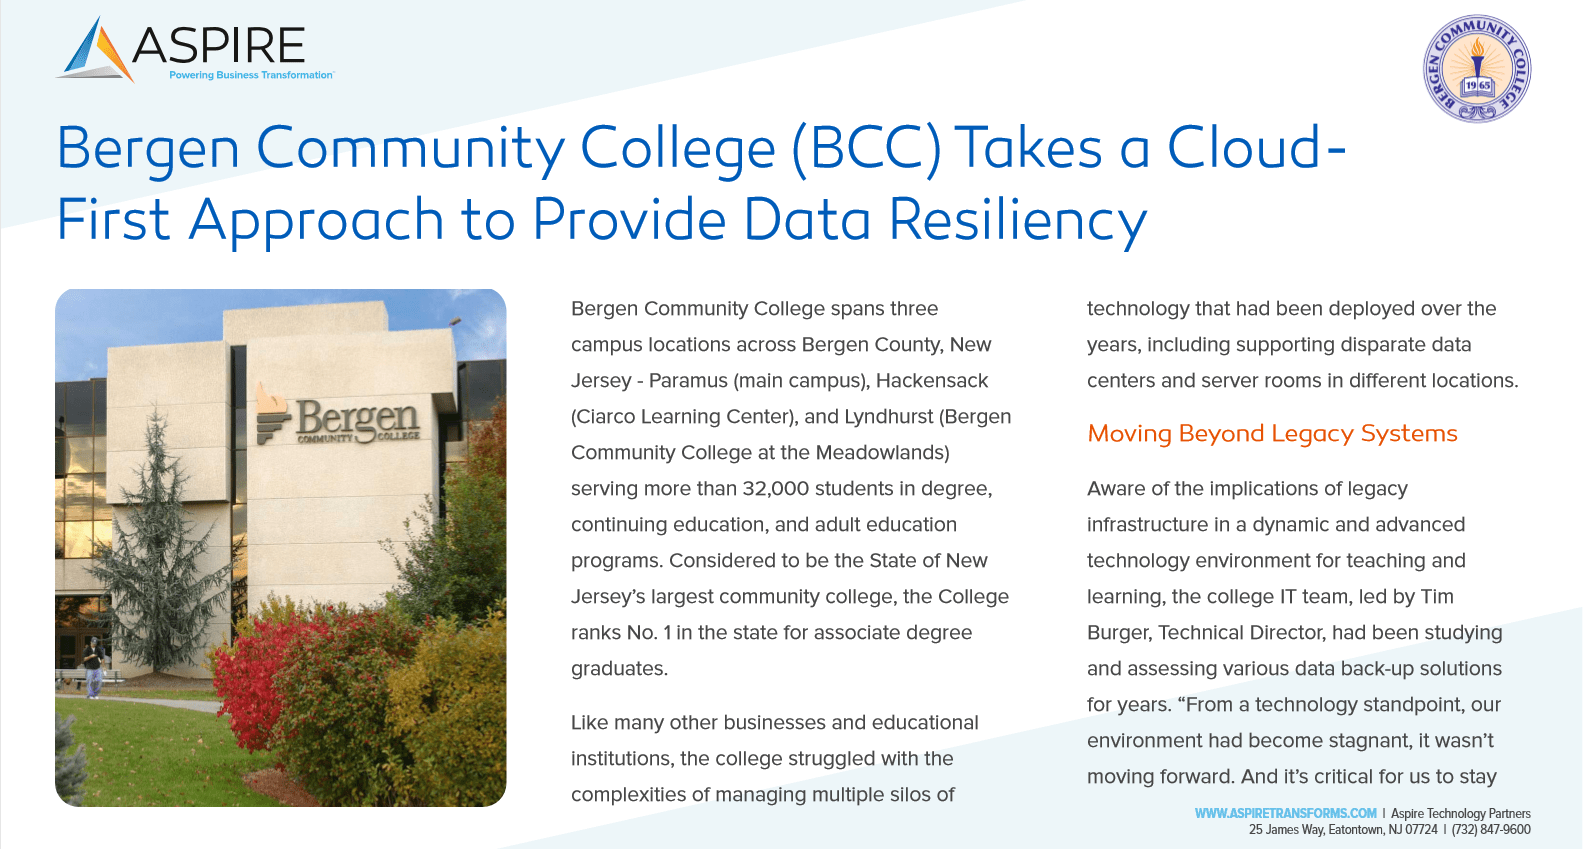 Customer Story: Bergen Community College (BCC) Takes a CloudFirst Approach to Provide Data Resiliency  Featured Image